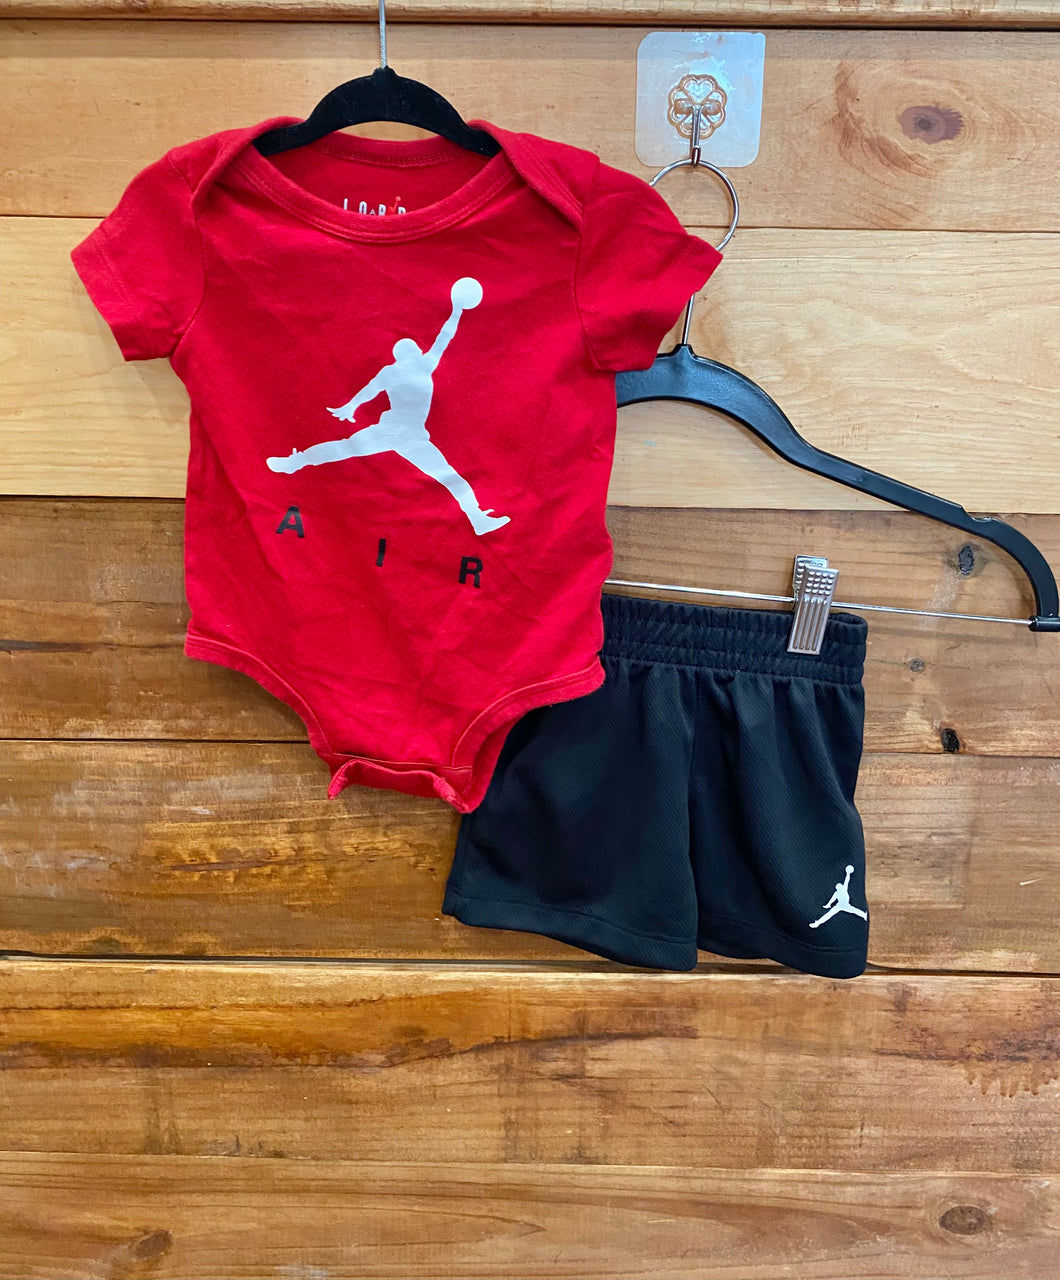 Air Jordan Black & Red 2pc Outfit Size 6m